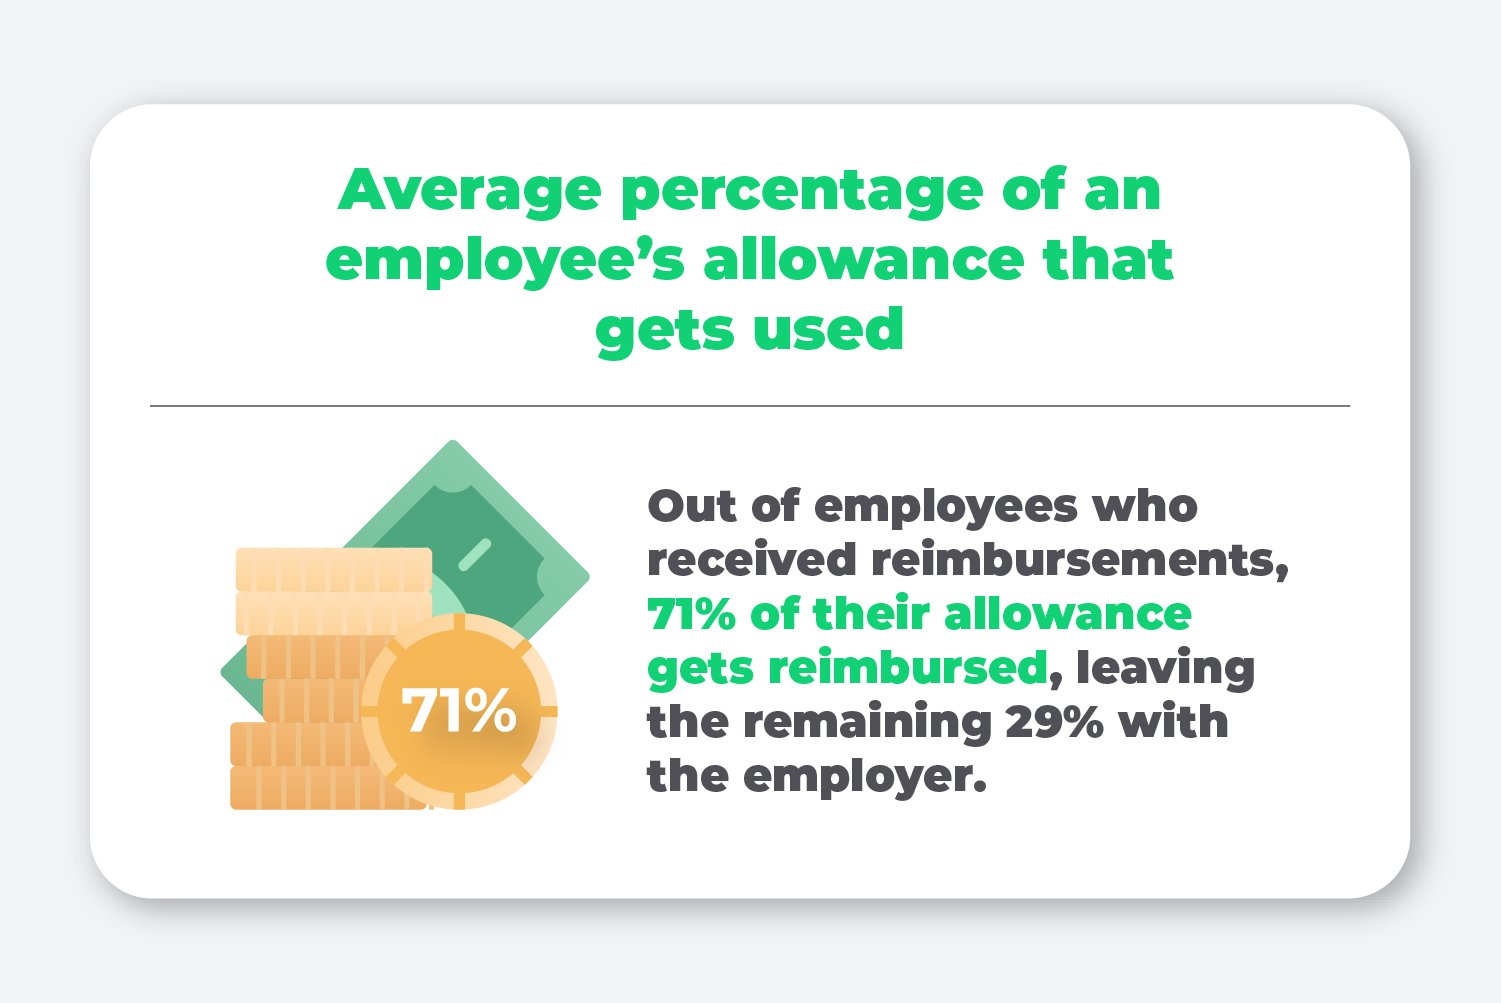 Average percentage of an employee's allowance that gets used. Out of employees who received reimbursements, 71% of their allowance gets reimbursed, leaving the reaming 29% with the employer.